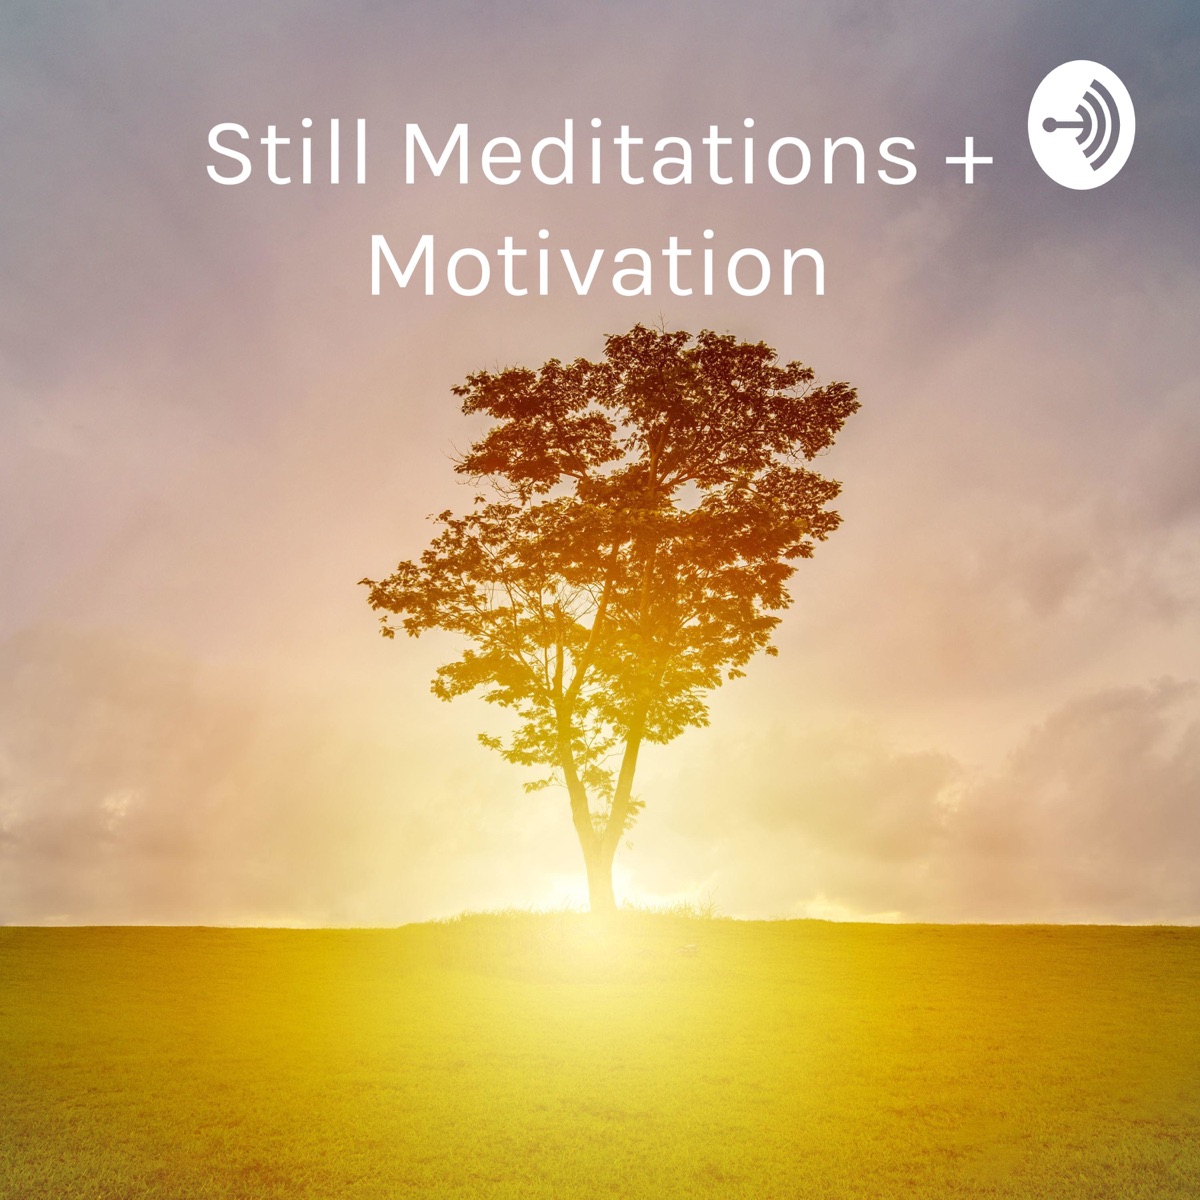 Still Meditations + Motivation: Discussions, Mindfulness and Positive Affirmations Podcast